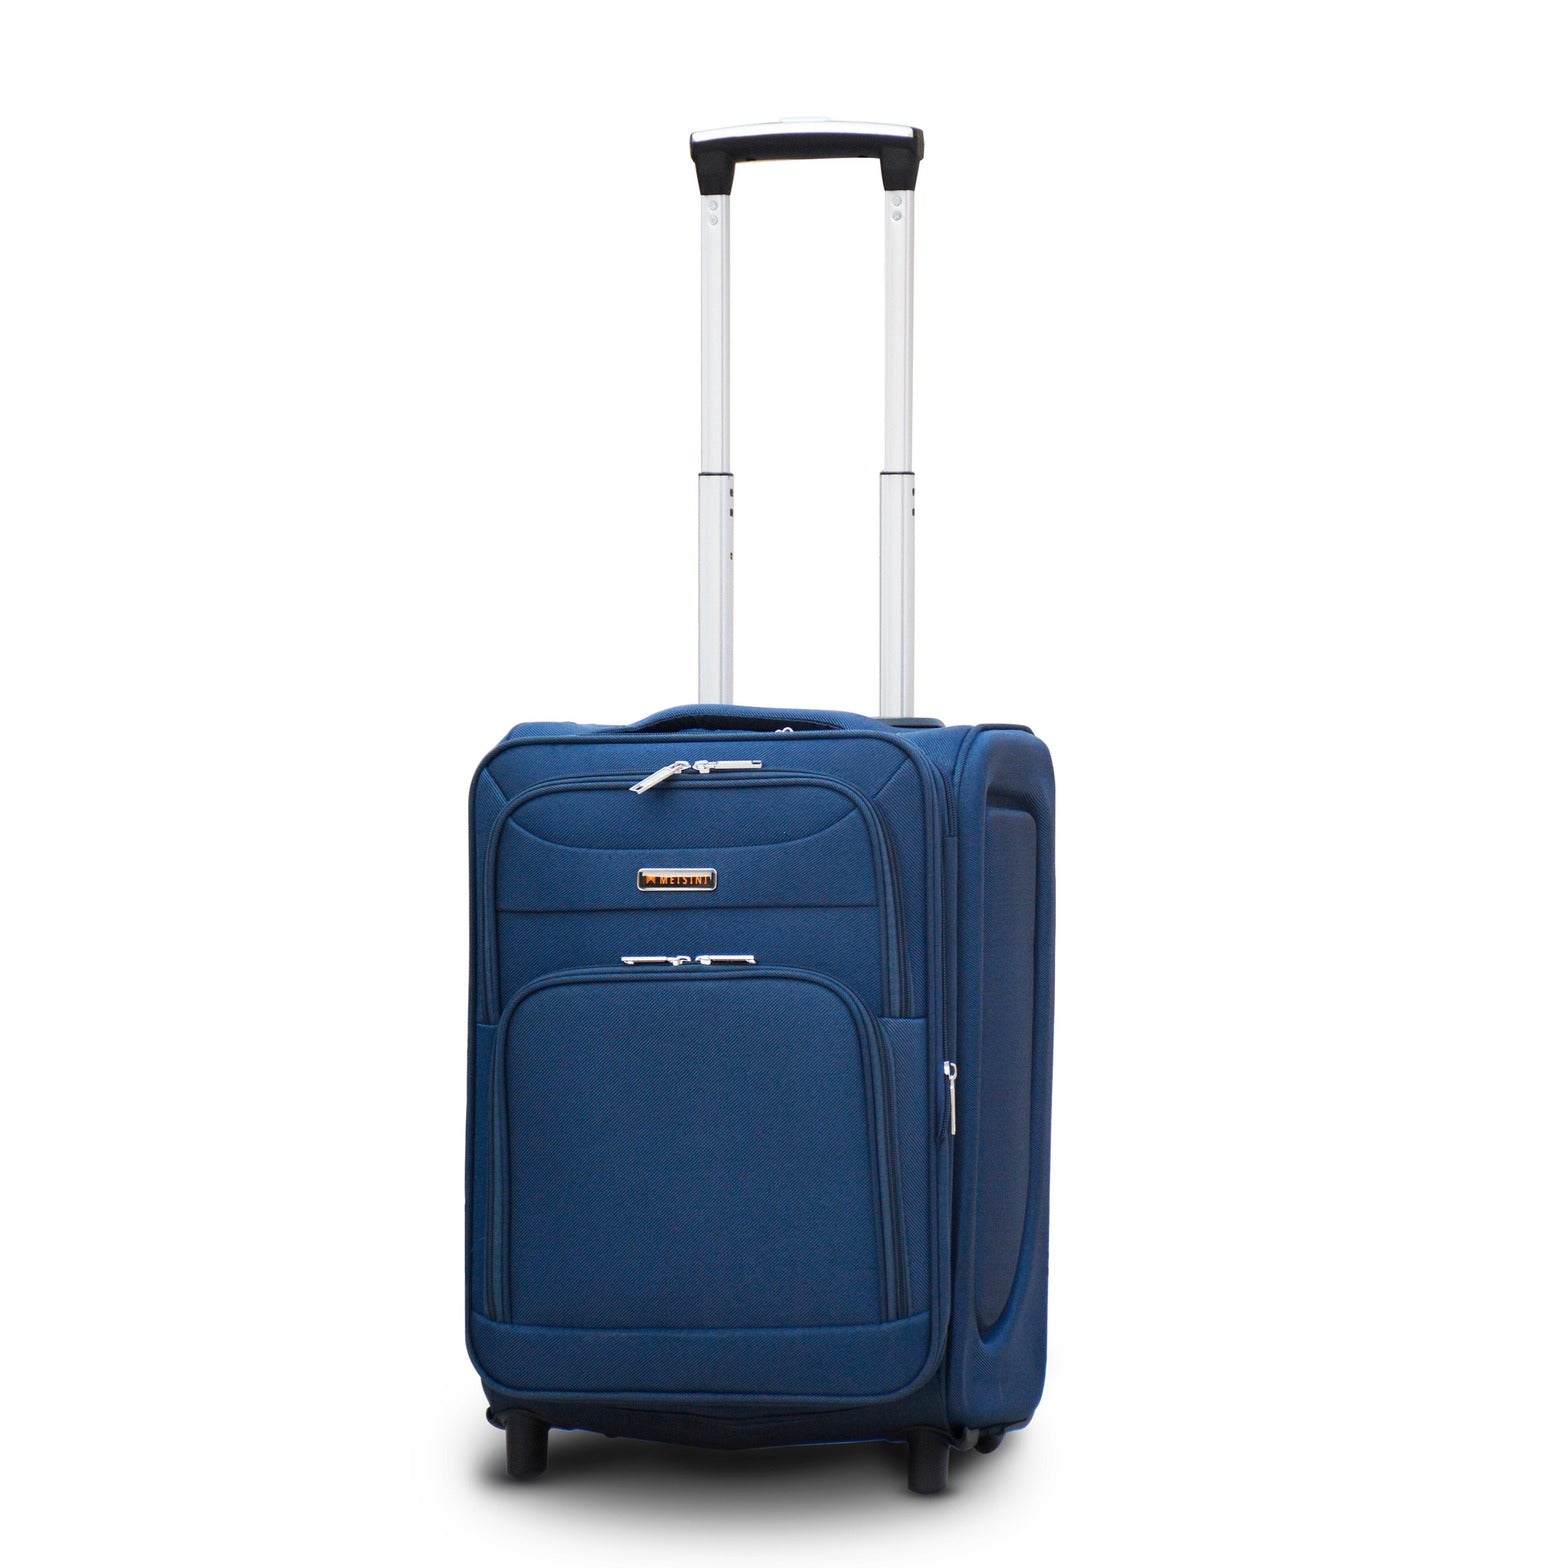 20" Blue Colour LP 2 Wheel 0161 Luggage Lightweight Soft Material Carry On Trolley Bag Zaappy.com